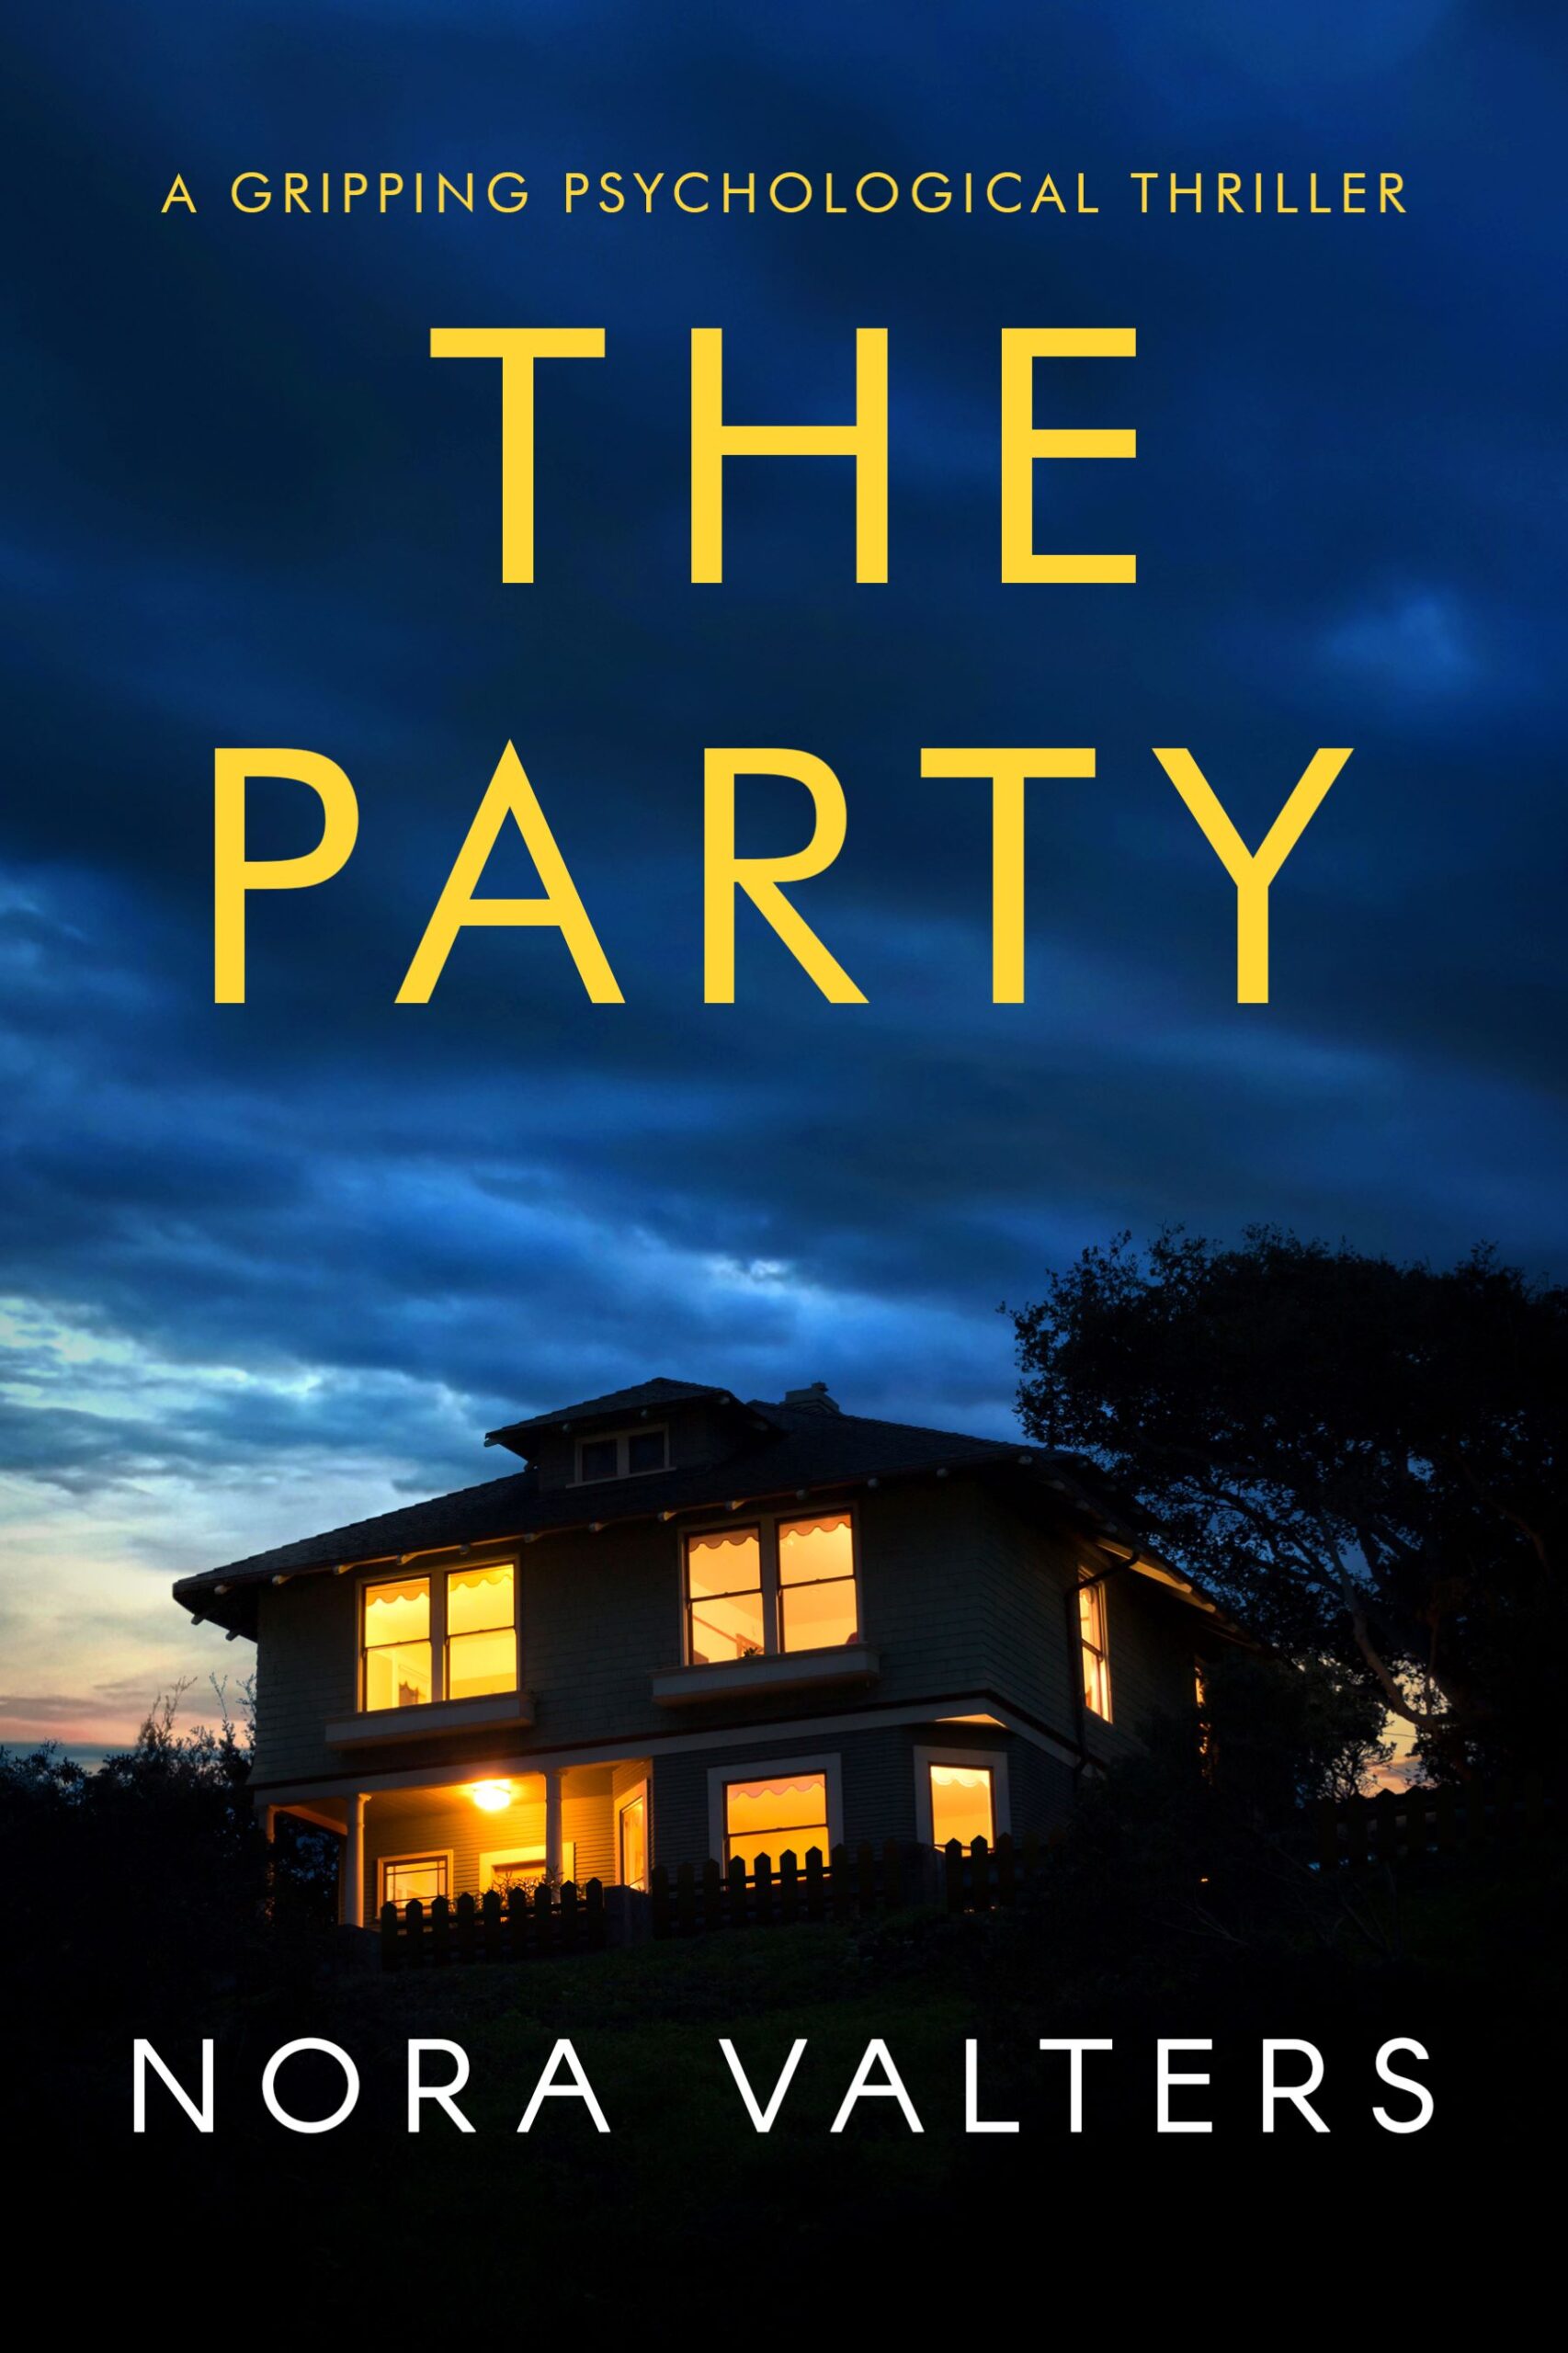 NORA VALTERS NEW RELEASE – THE PARTY